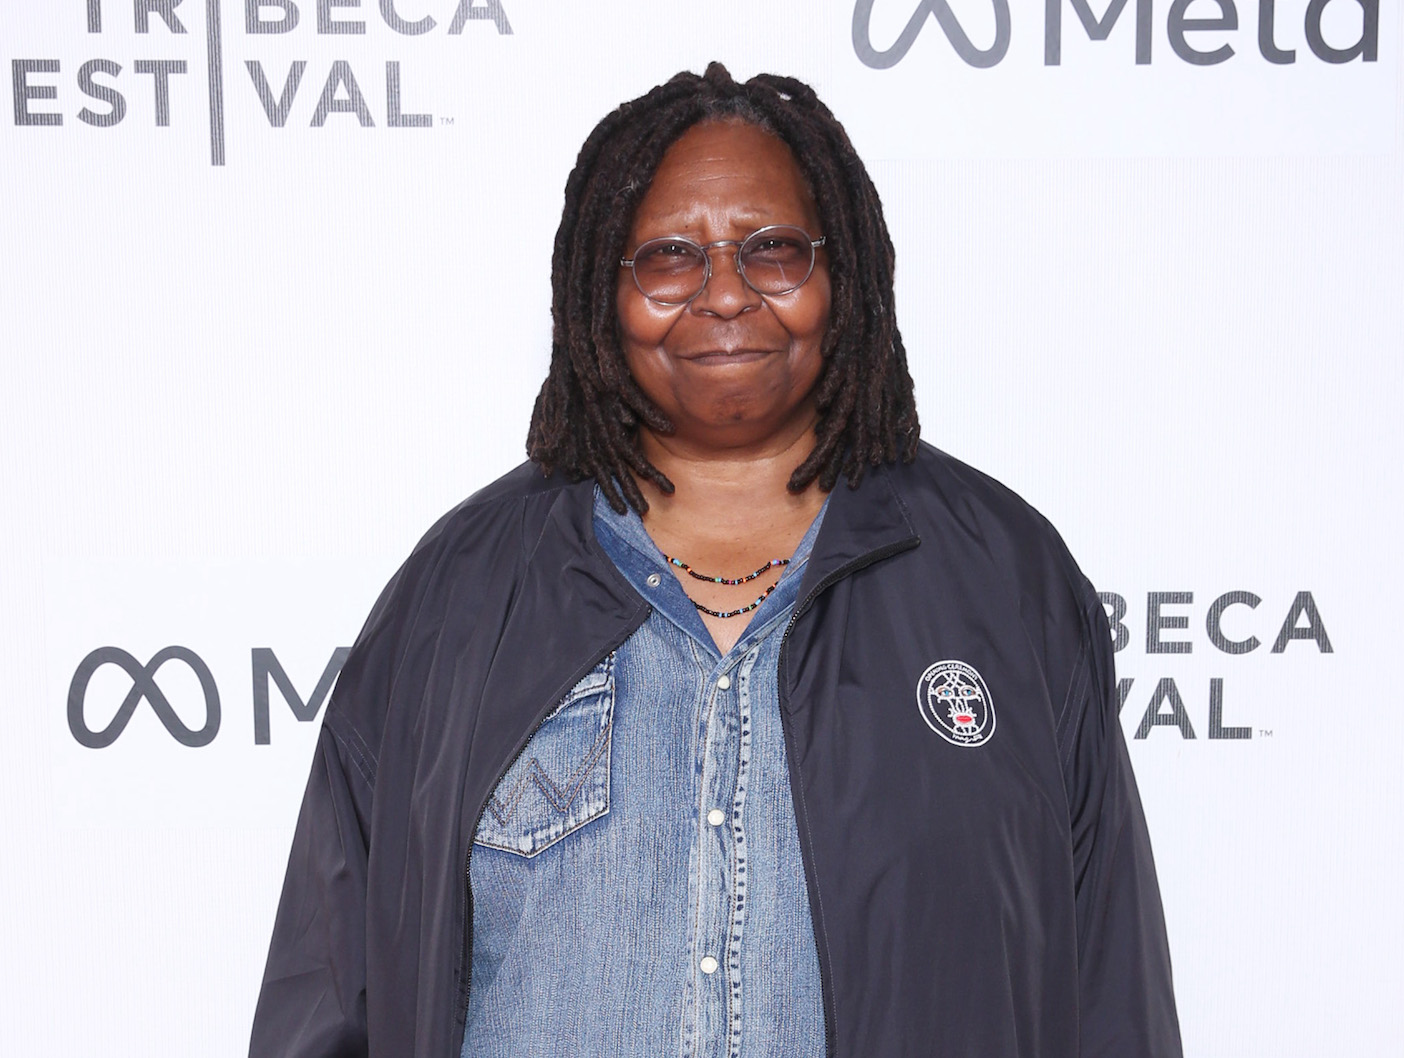 TV Gossip: Whoopi goldberg is reportedly demanding $24M for a payday ‘View’Exit